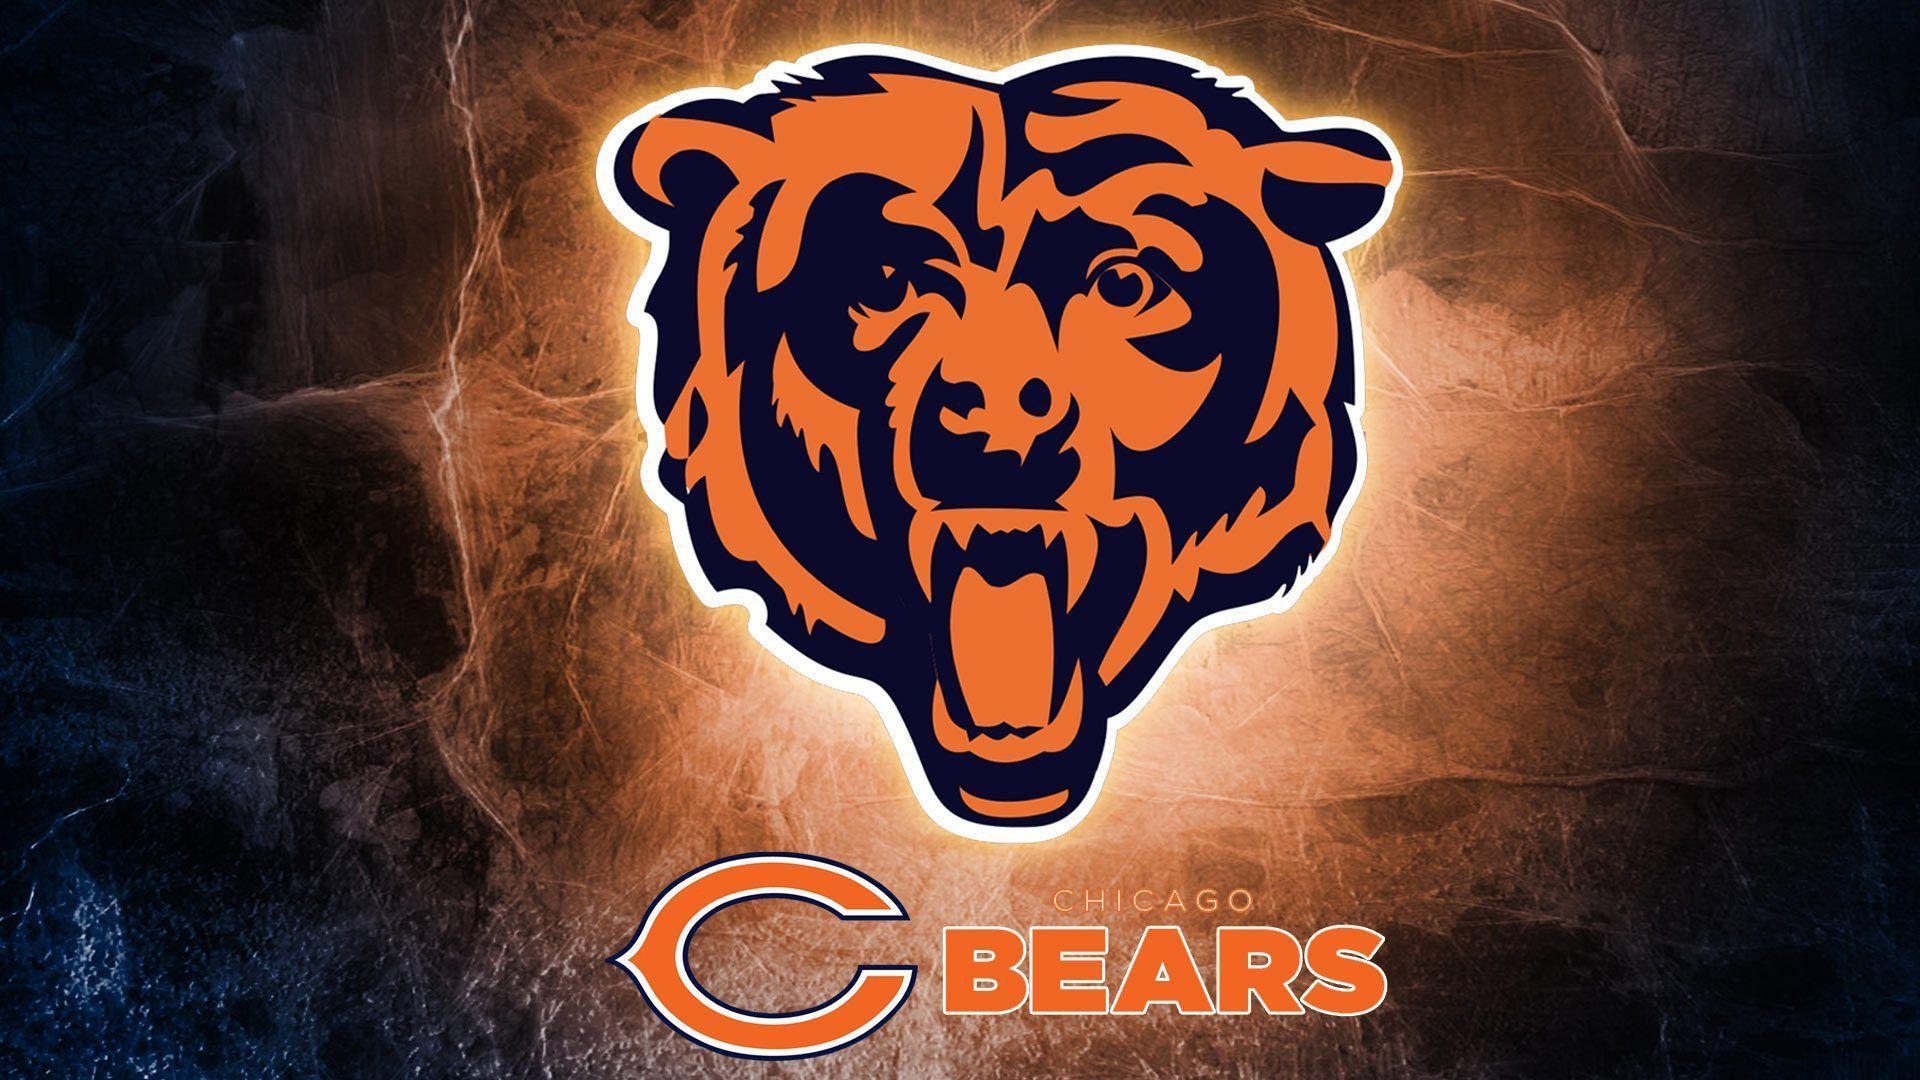 Download Chicago Bears logo Hd 1080p Wallpapers screen size 1920X1080